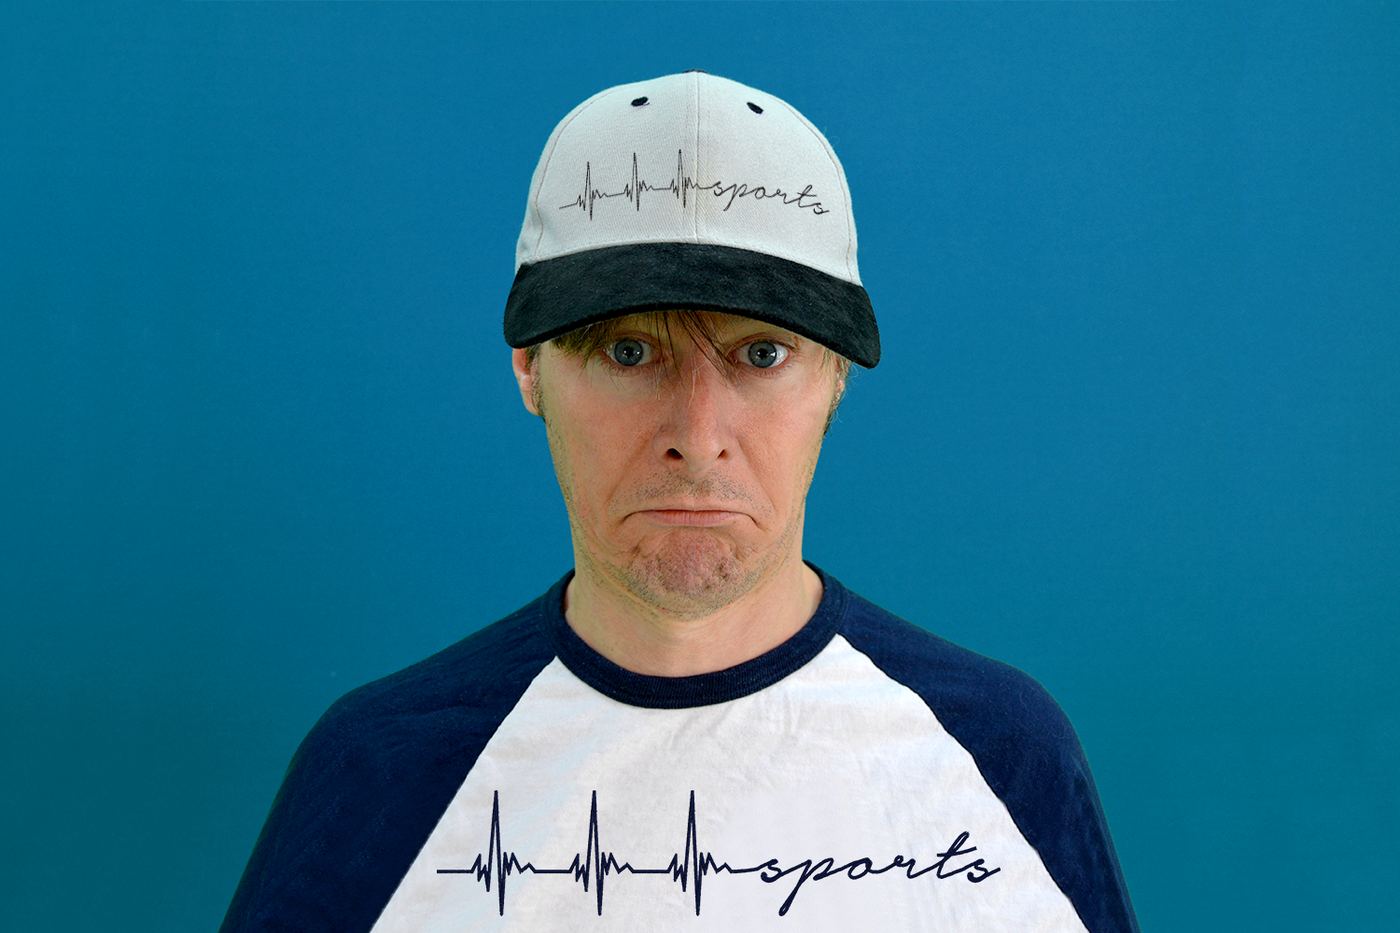 White man wearing a baseball cap and raglan tee. Both items of clothing have a heartbeat embroidery that ends in the word "sports"